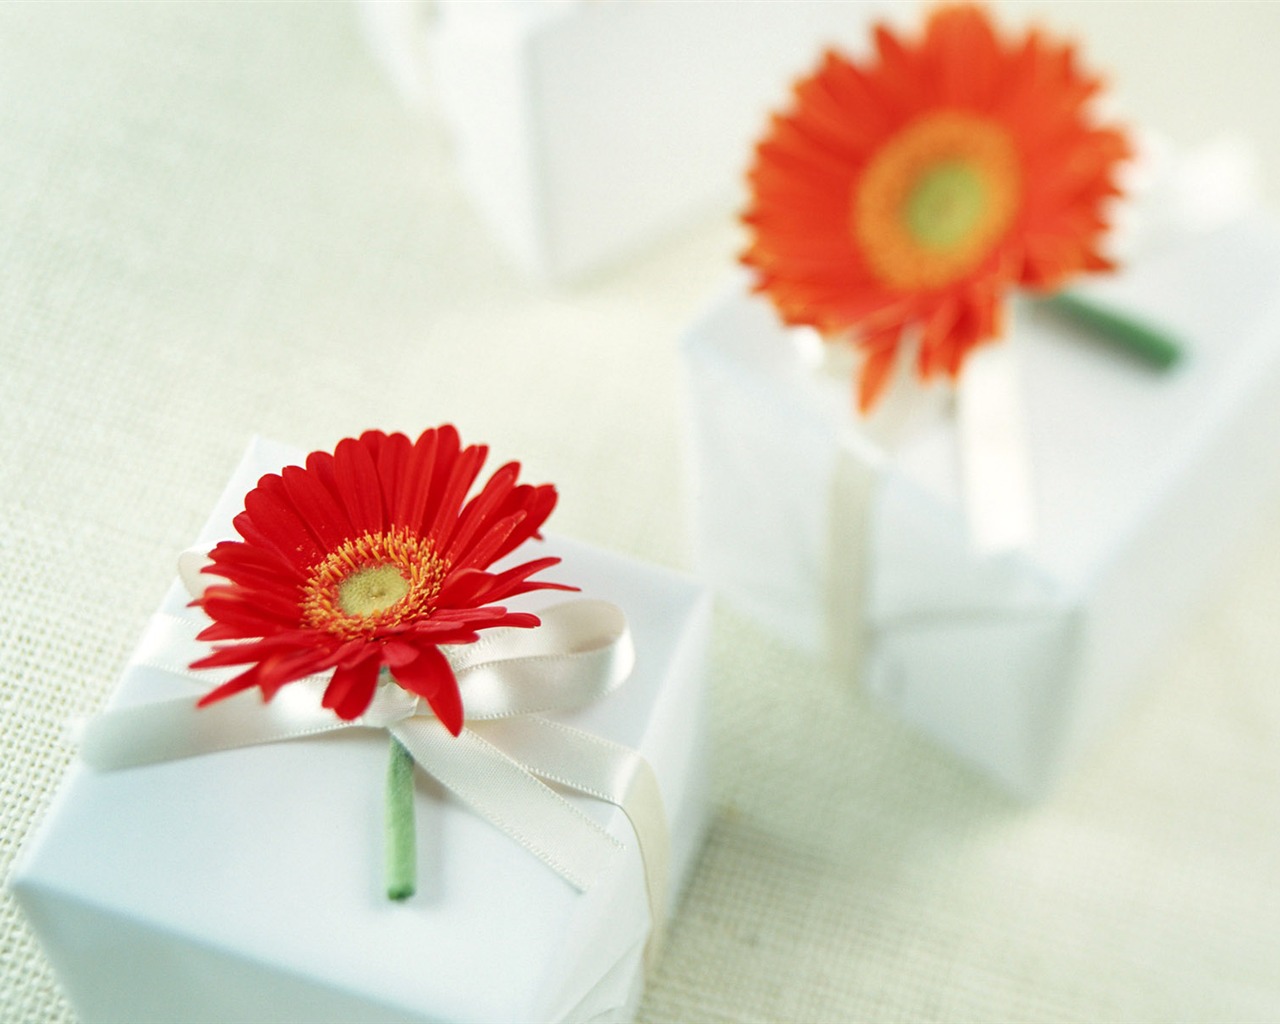 Flowers and gifts wallpaper (1) #18 - 1280x1024